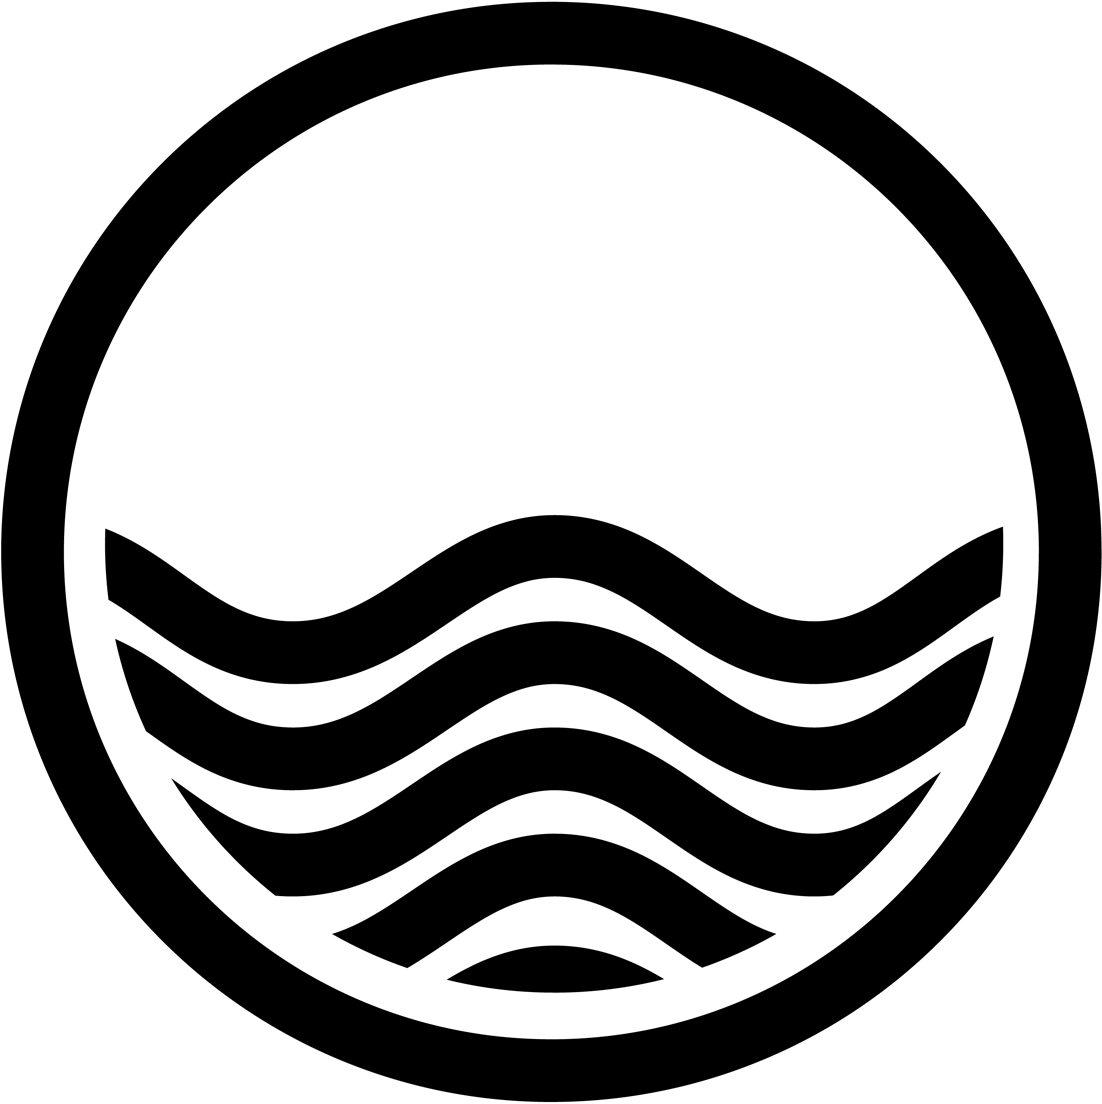 Waves wave clipart 0